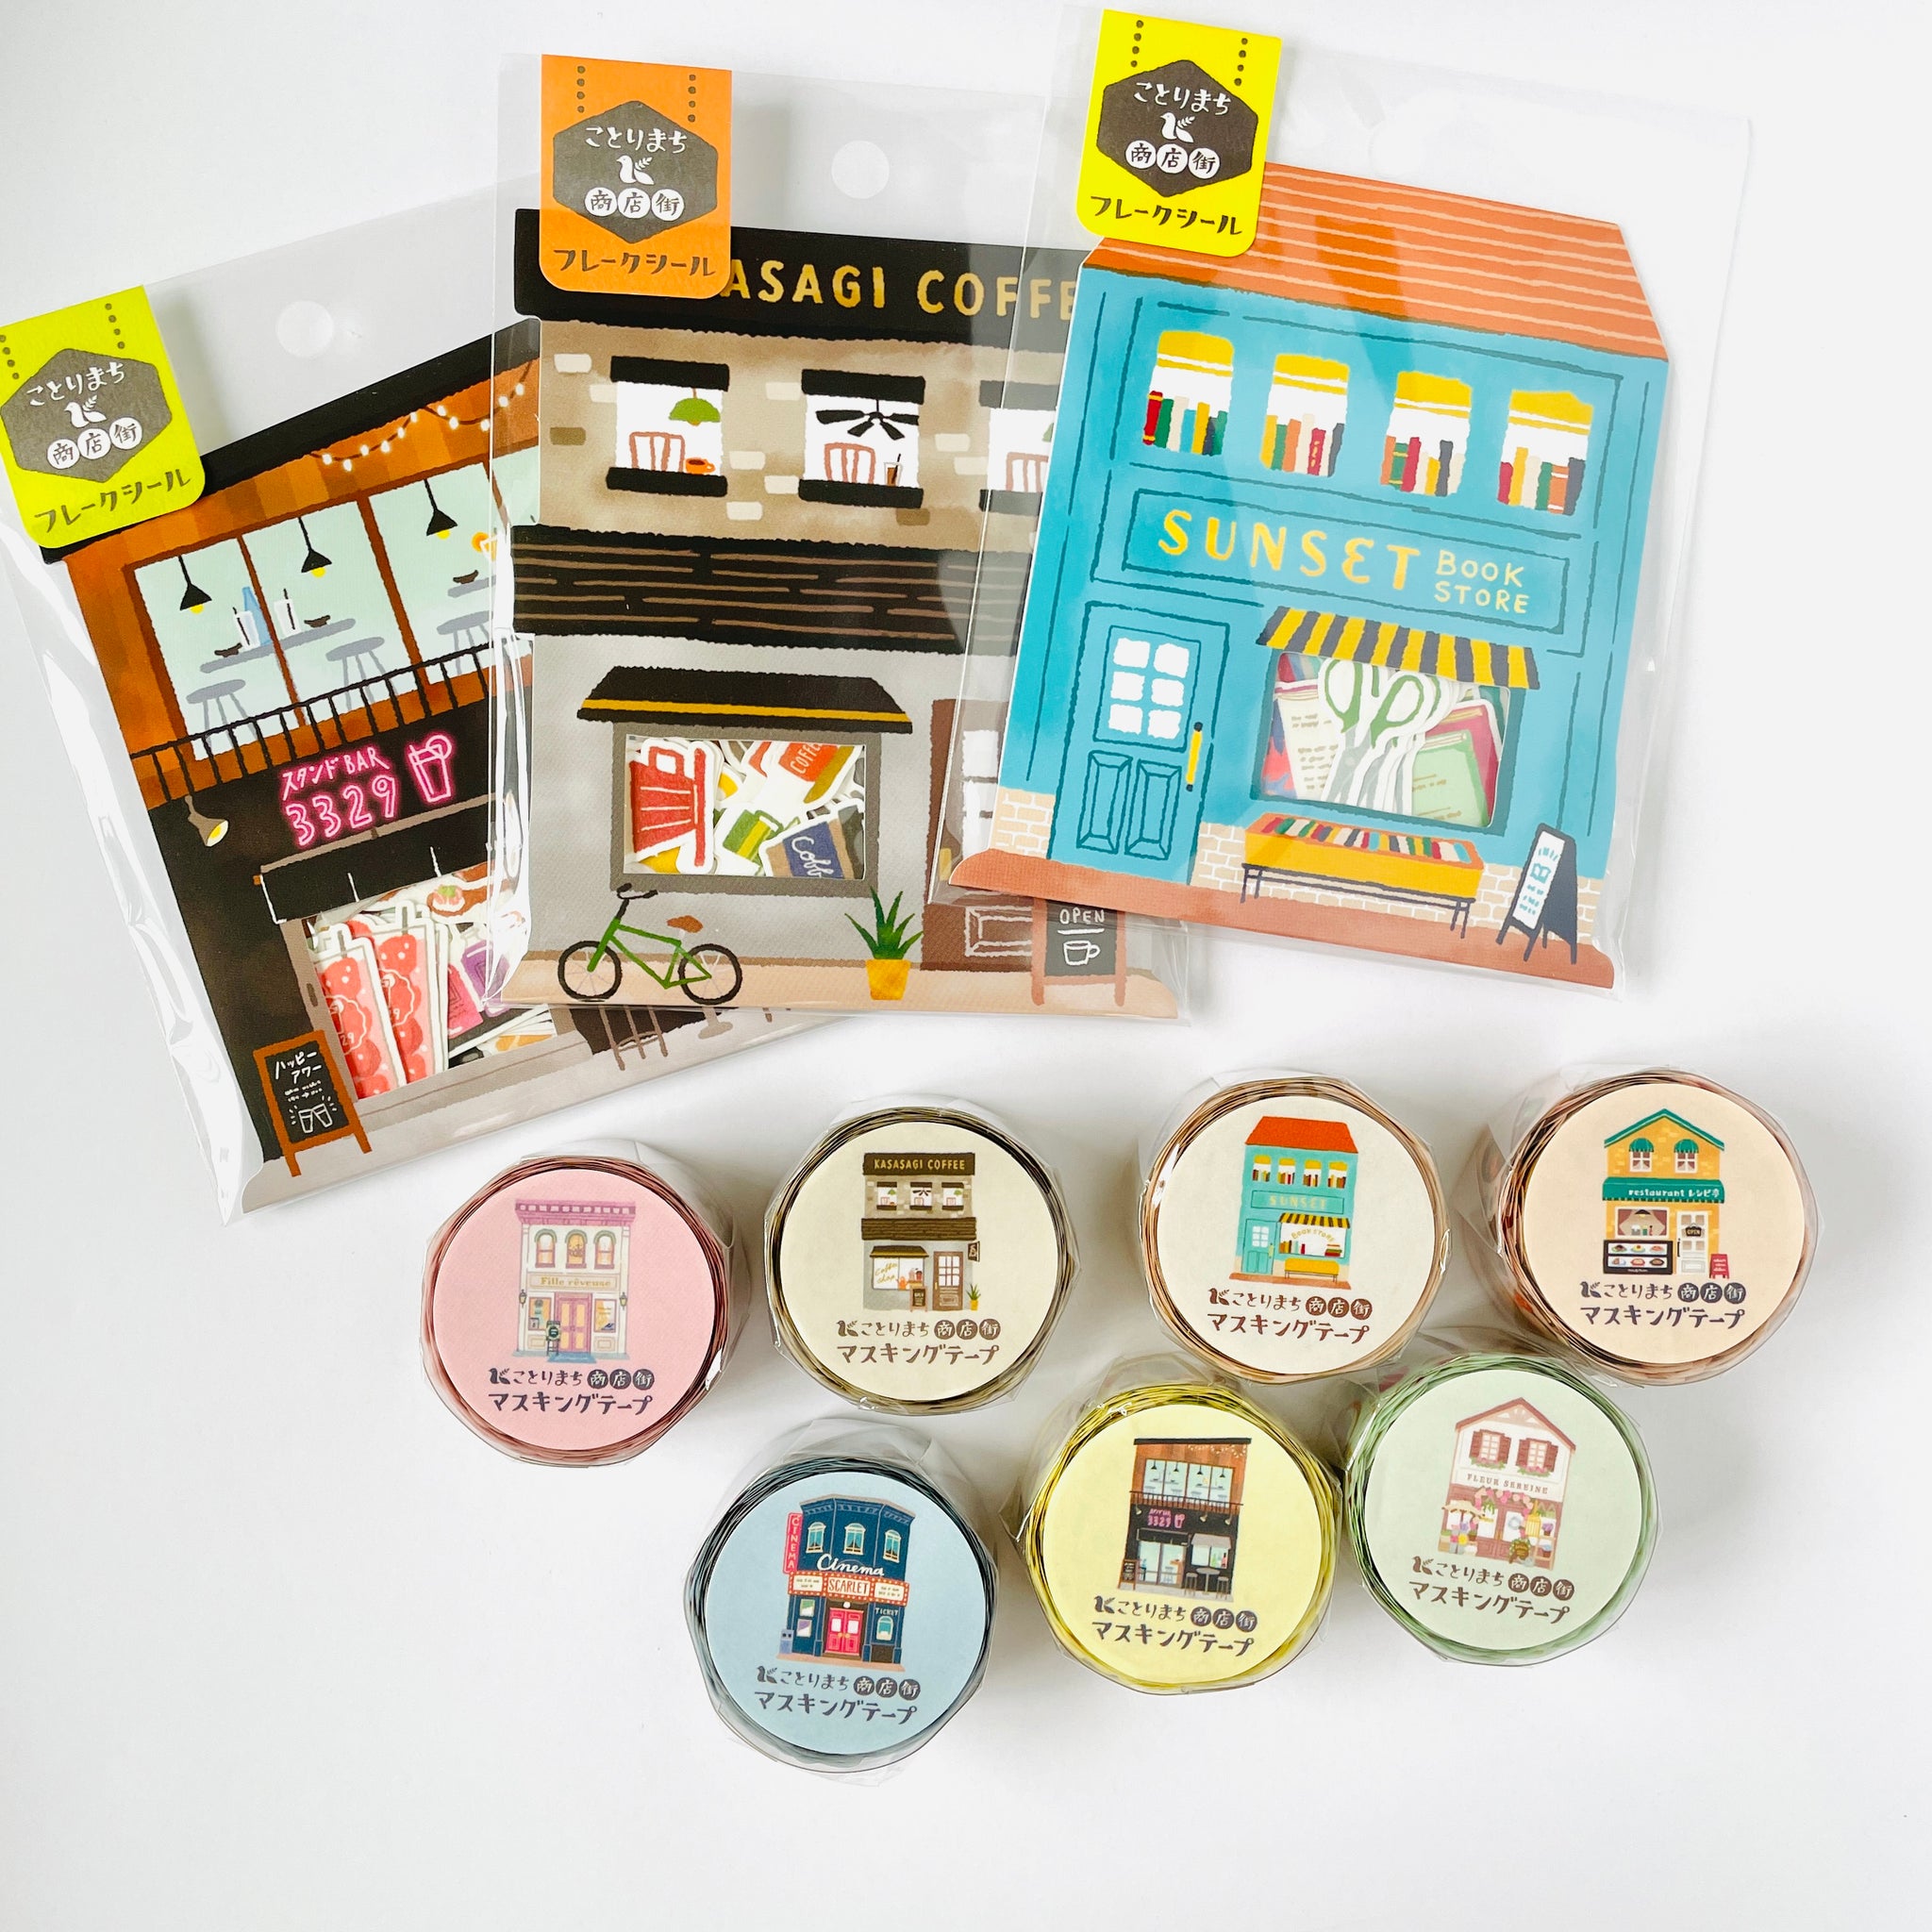 Washi Tape Crafts (S) – Wholesale Craft Books Easy